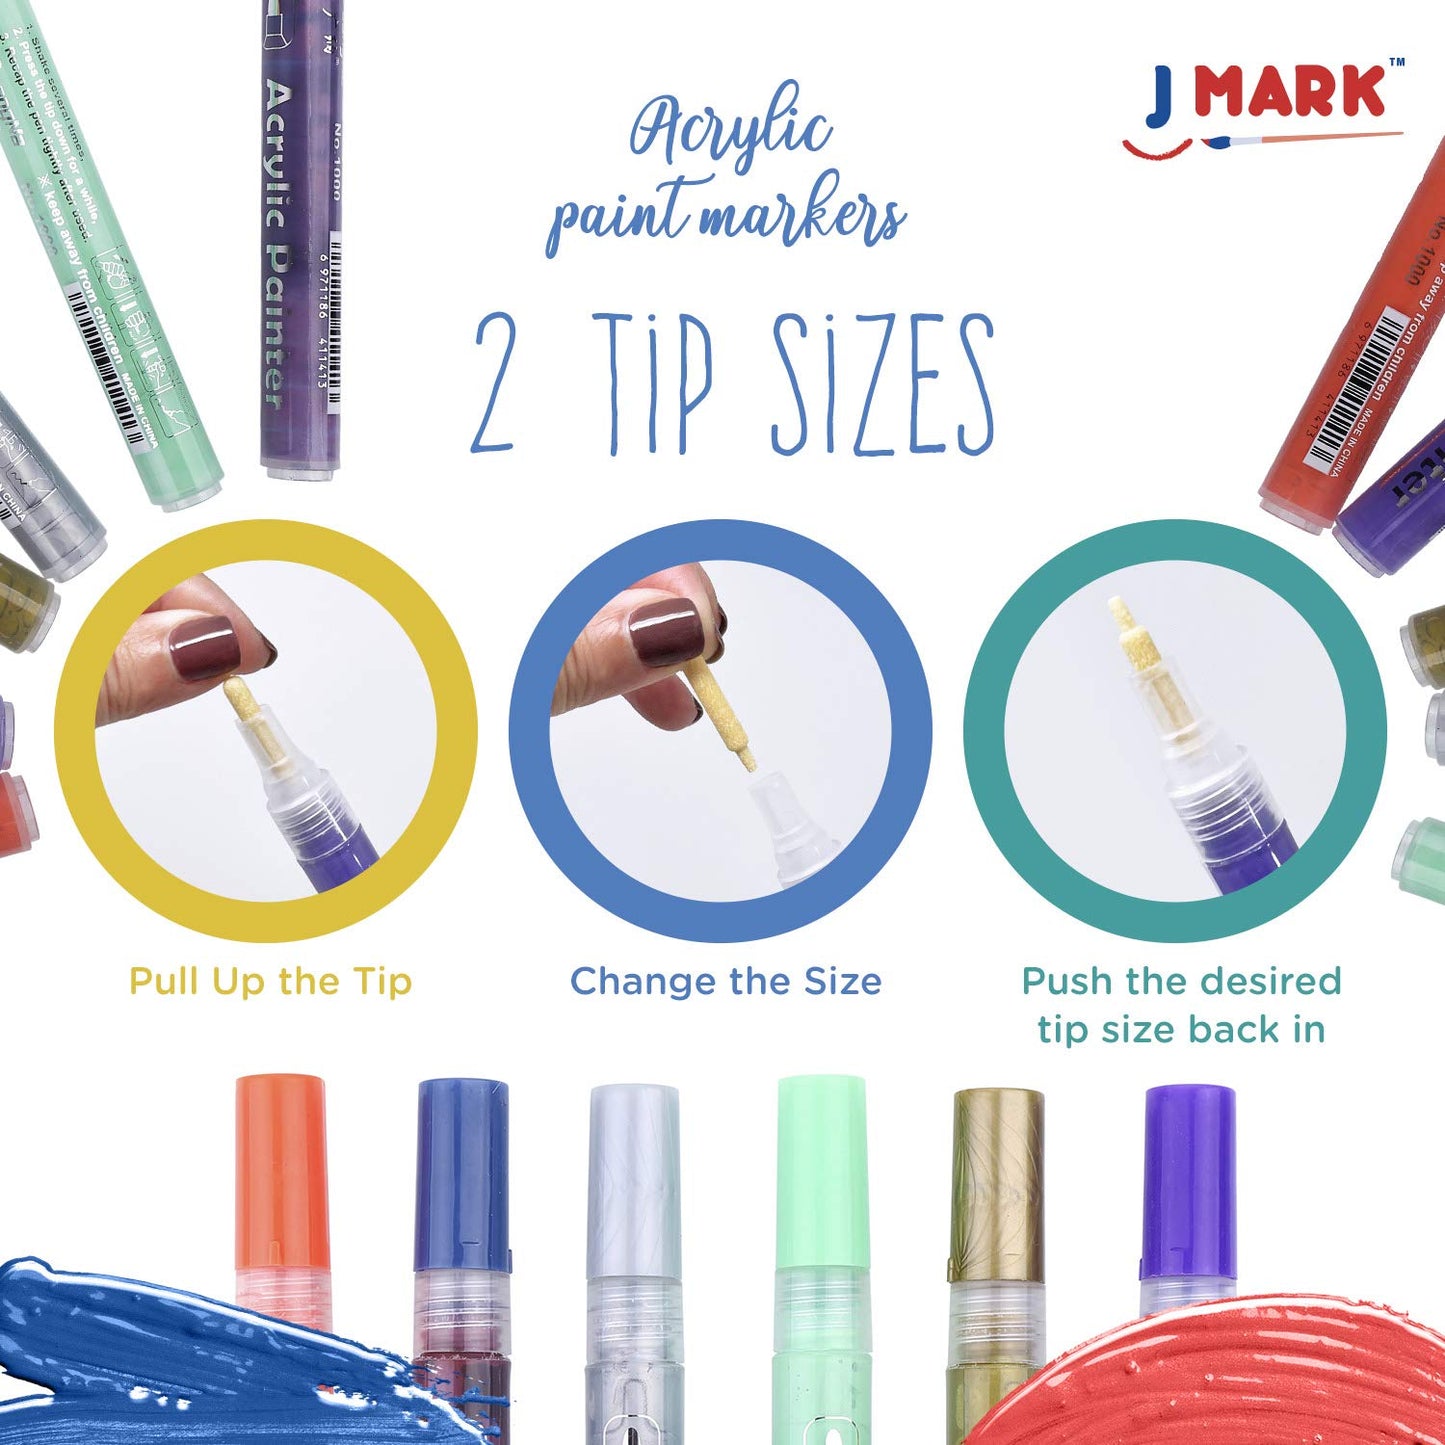 J MARK Premium Rock Painting Kit - Acrylic Paint Pens for Rock Painting, Glow in The Dark and More